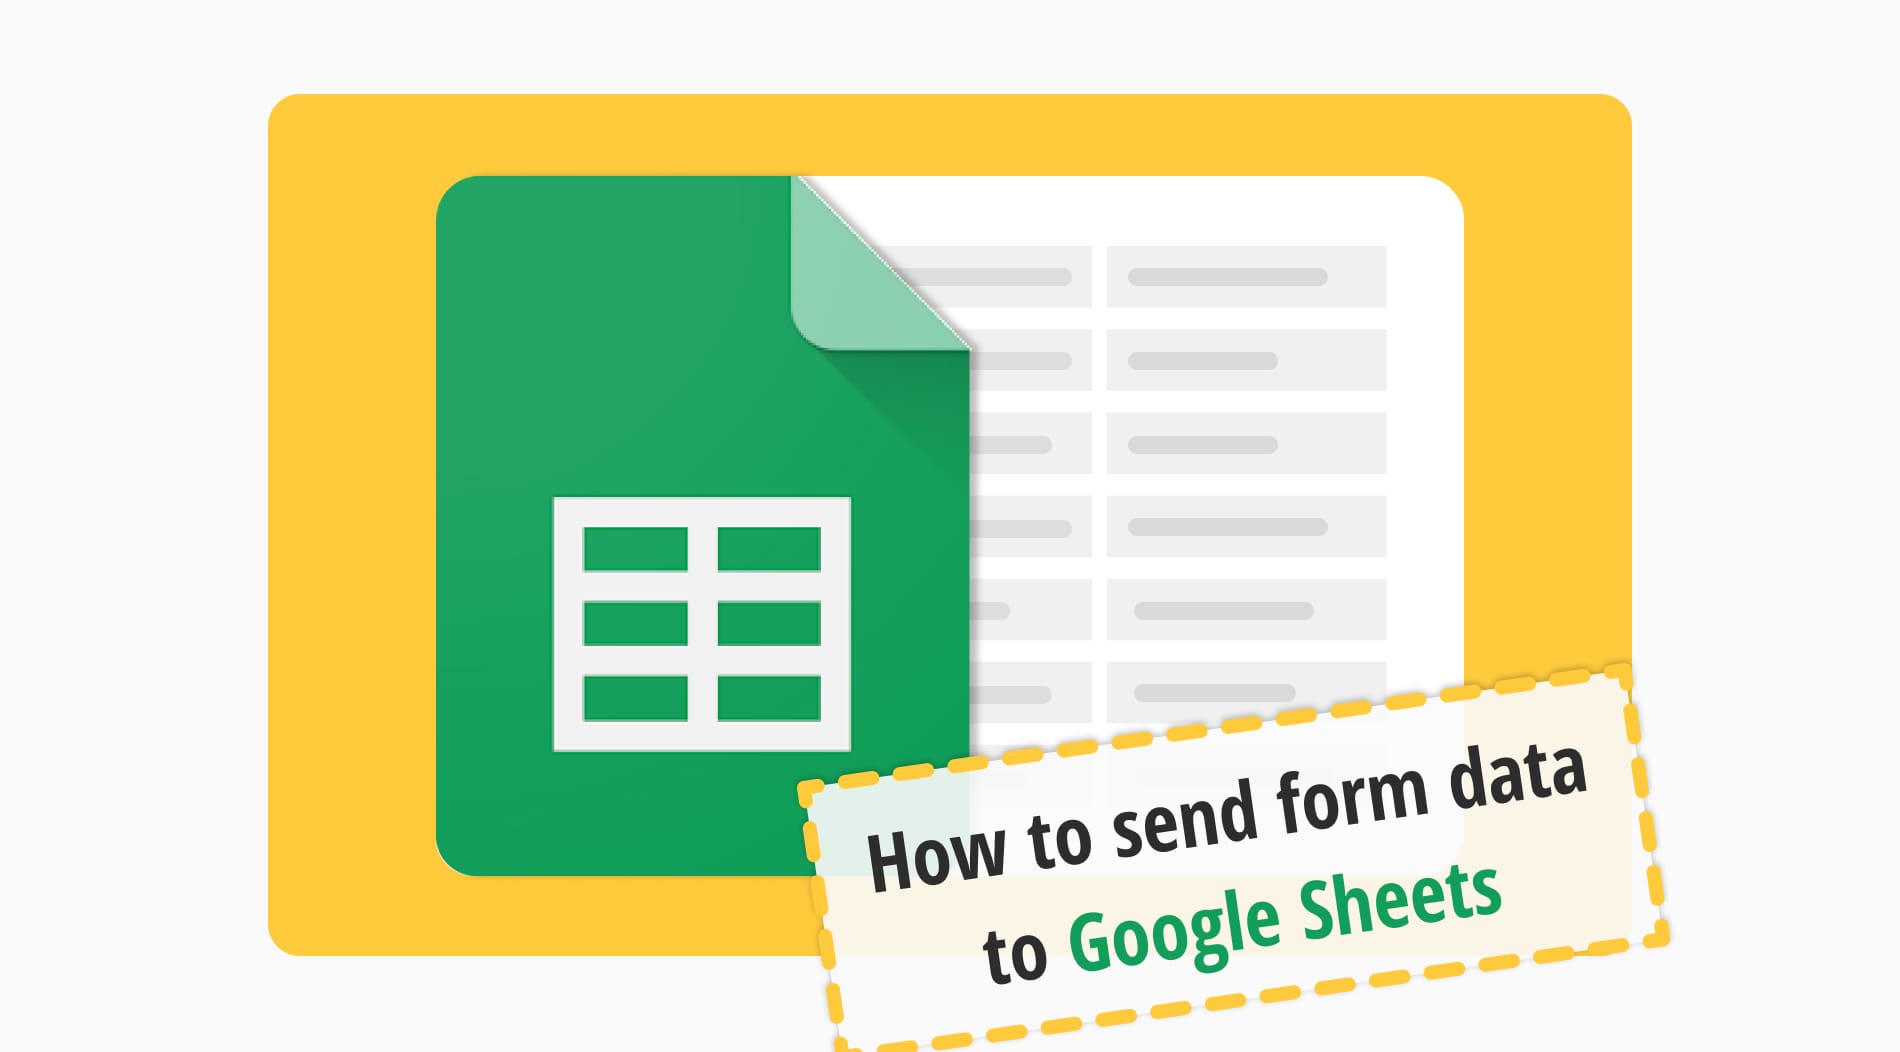 How to send form data to Google Sheets